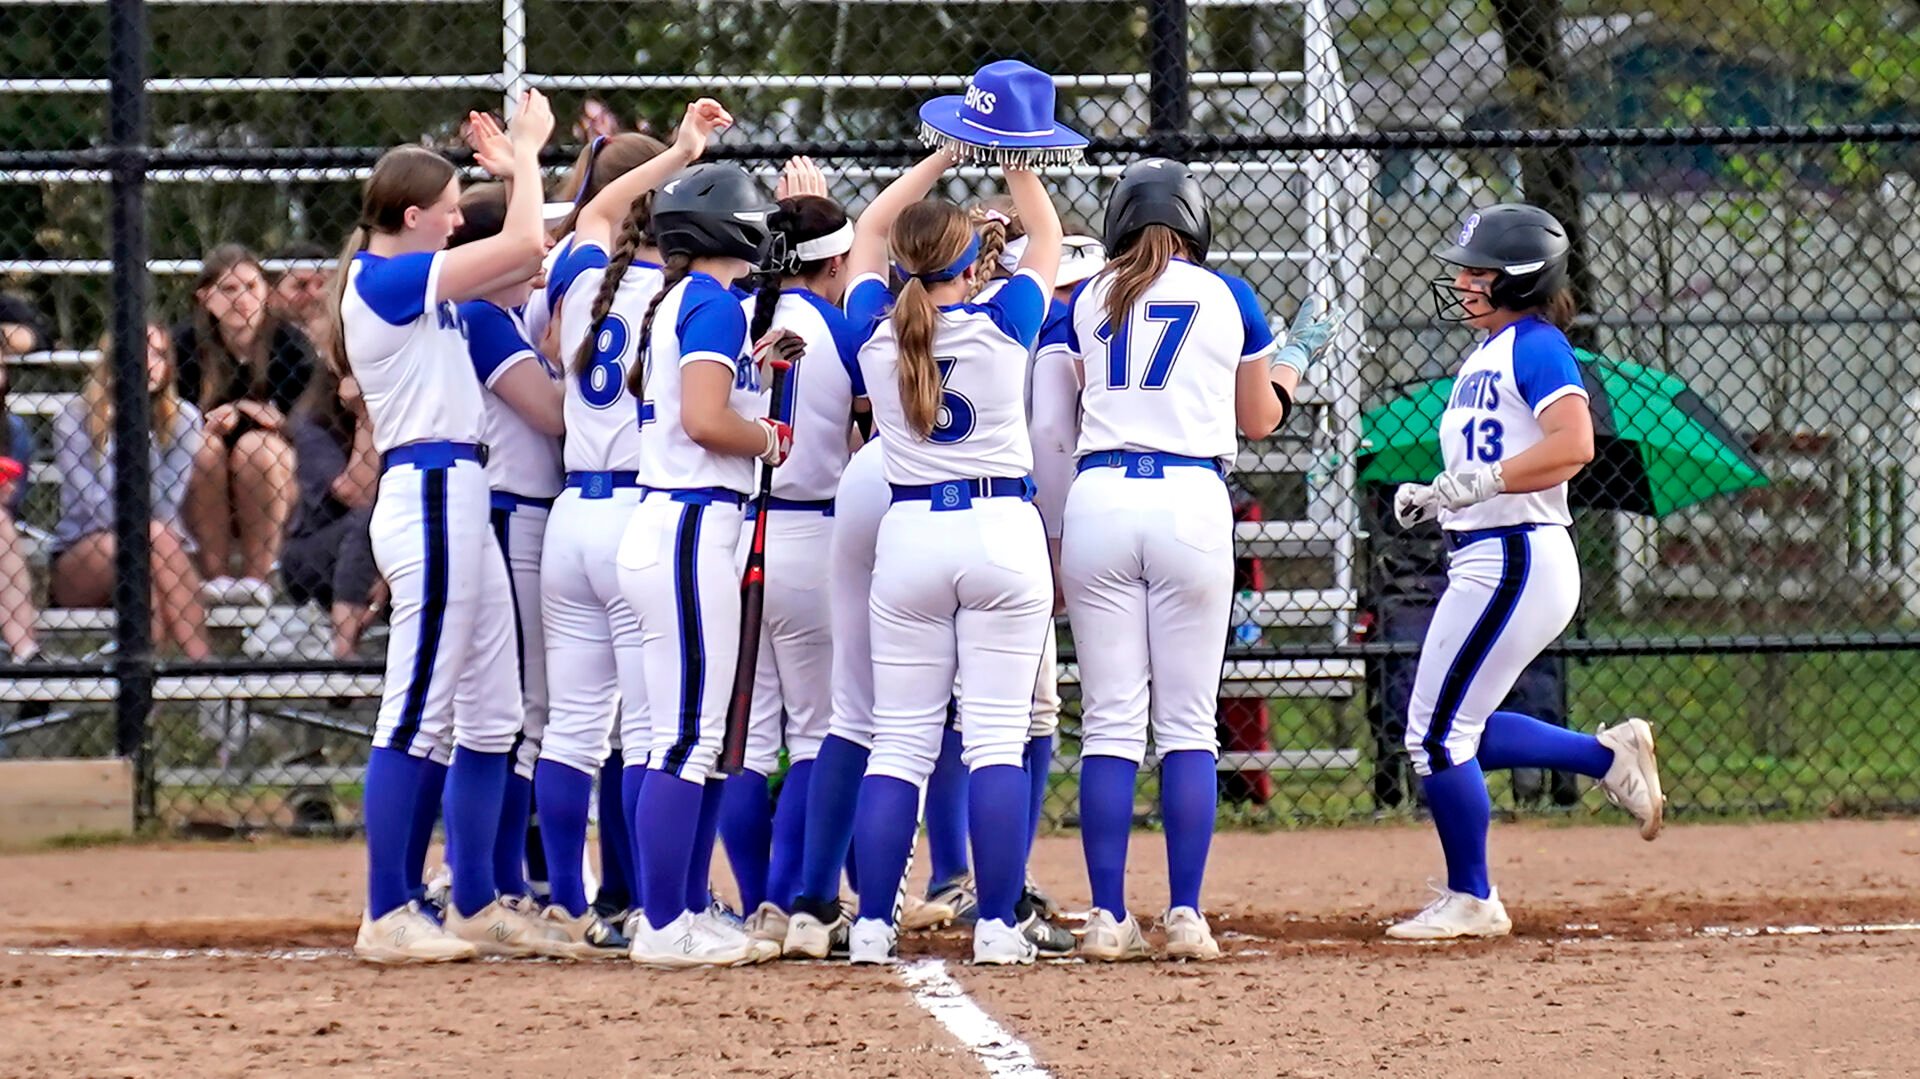 Furniss’ strong pitching, team’s high-powered offense helps Southington clinch playoff spot